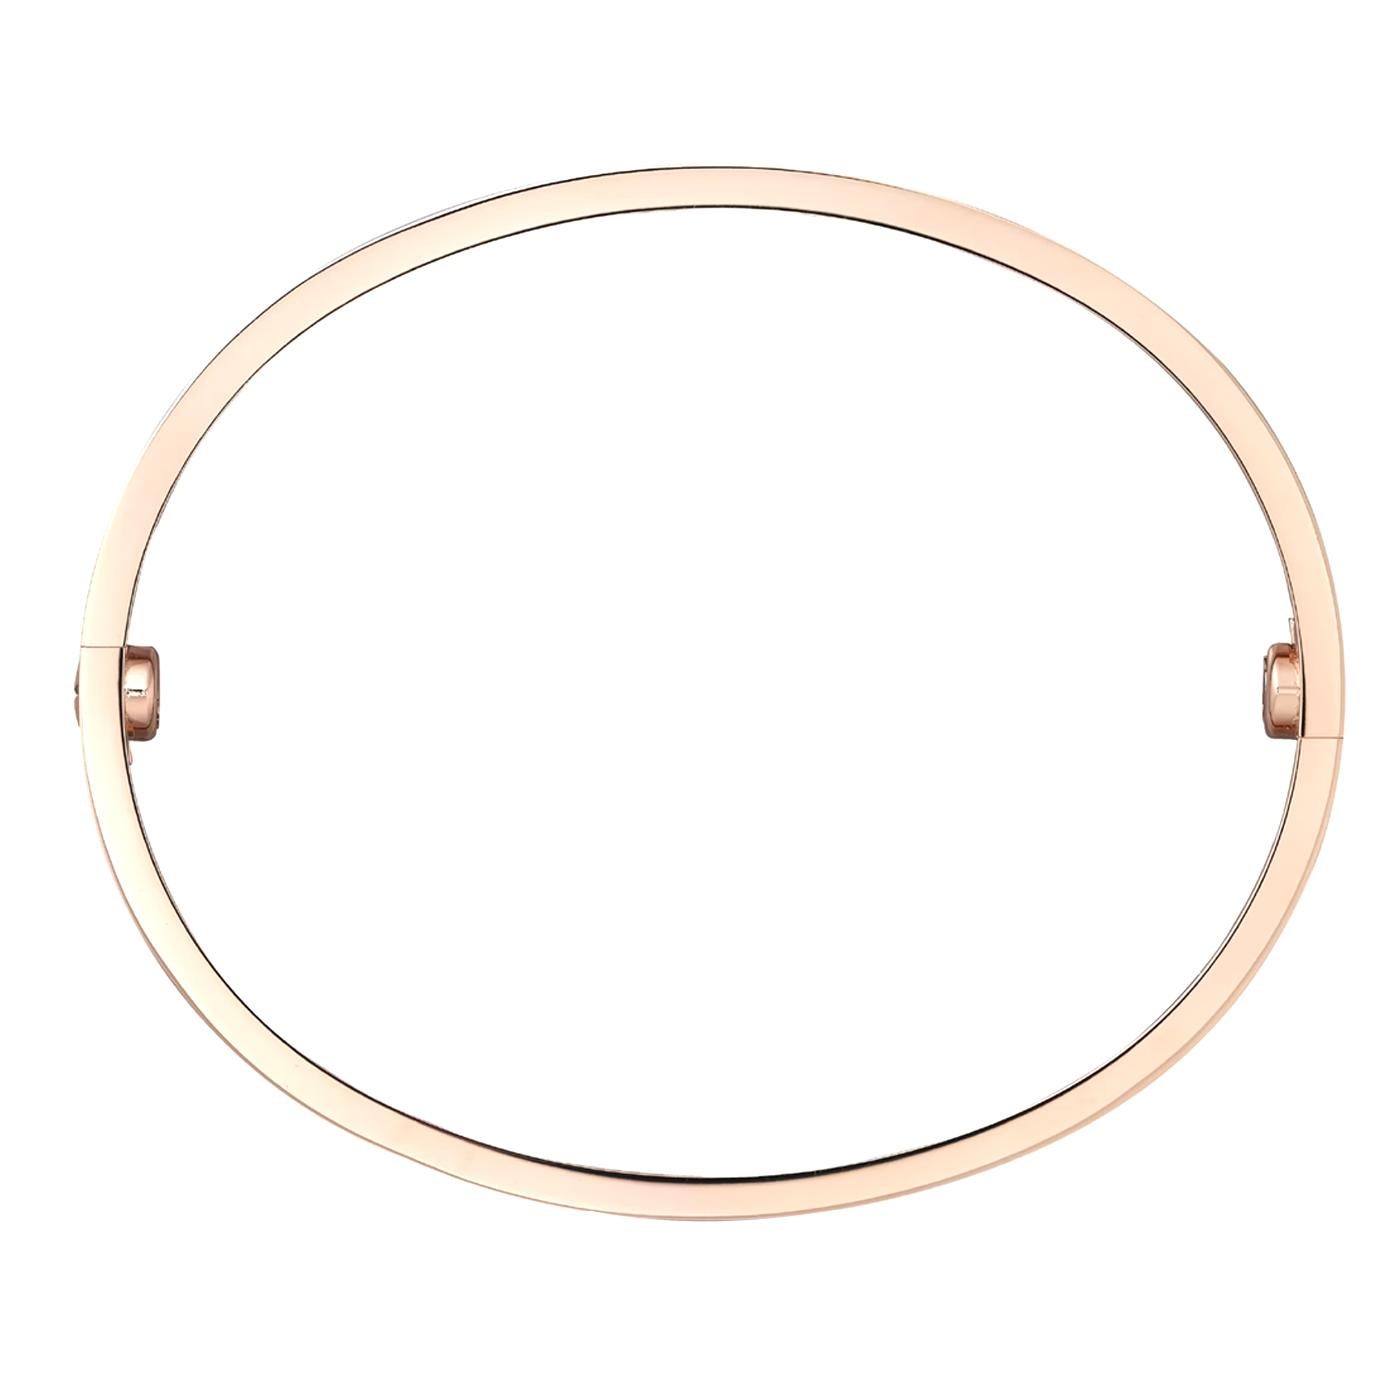 Cartier LOVE Bracelet 18K Rose Gold Size 17 Vintage Bangle with Screwdriver In Good Condition For Sale In Aventura, FL